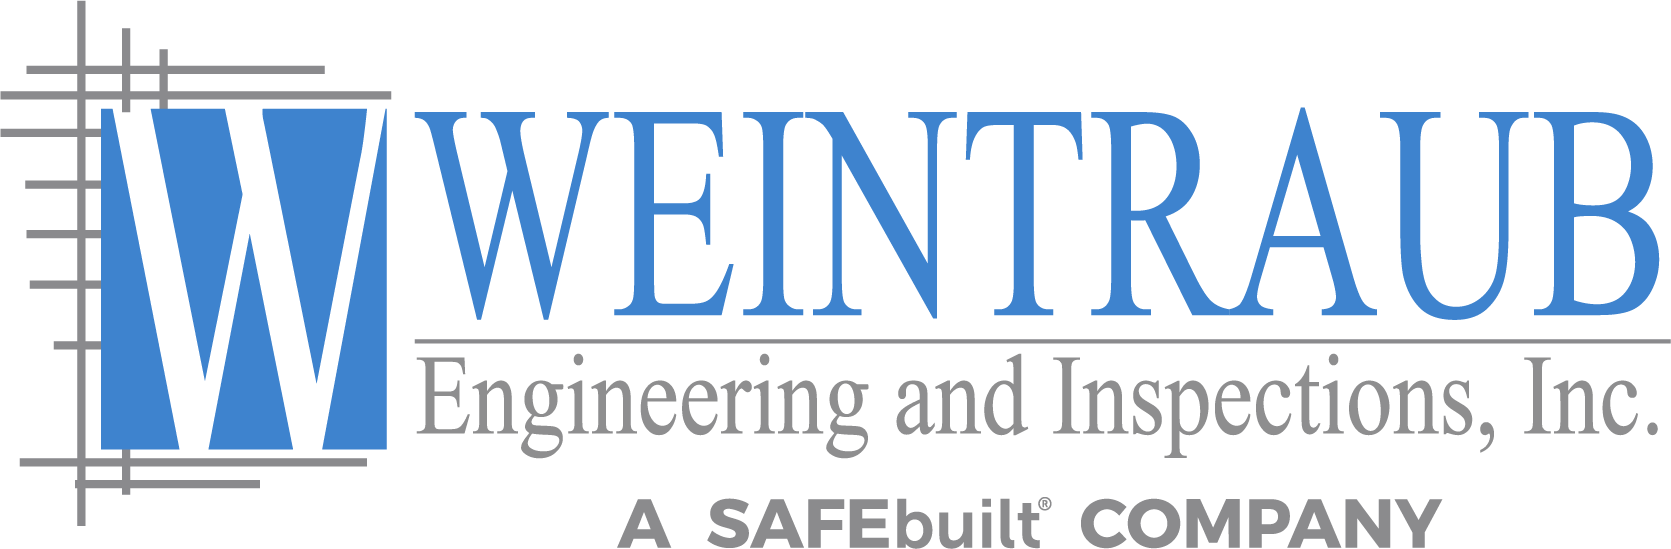 Weintraub Engineering and Inspections - a SAFEbuilt Company